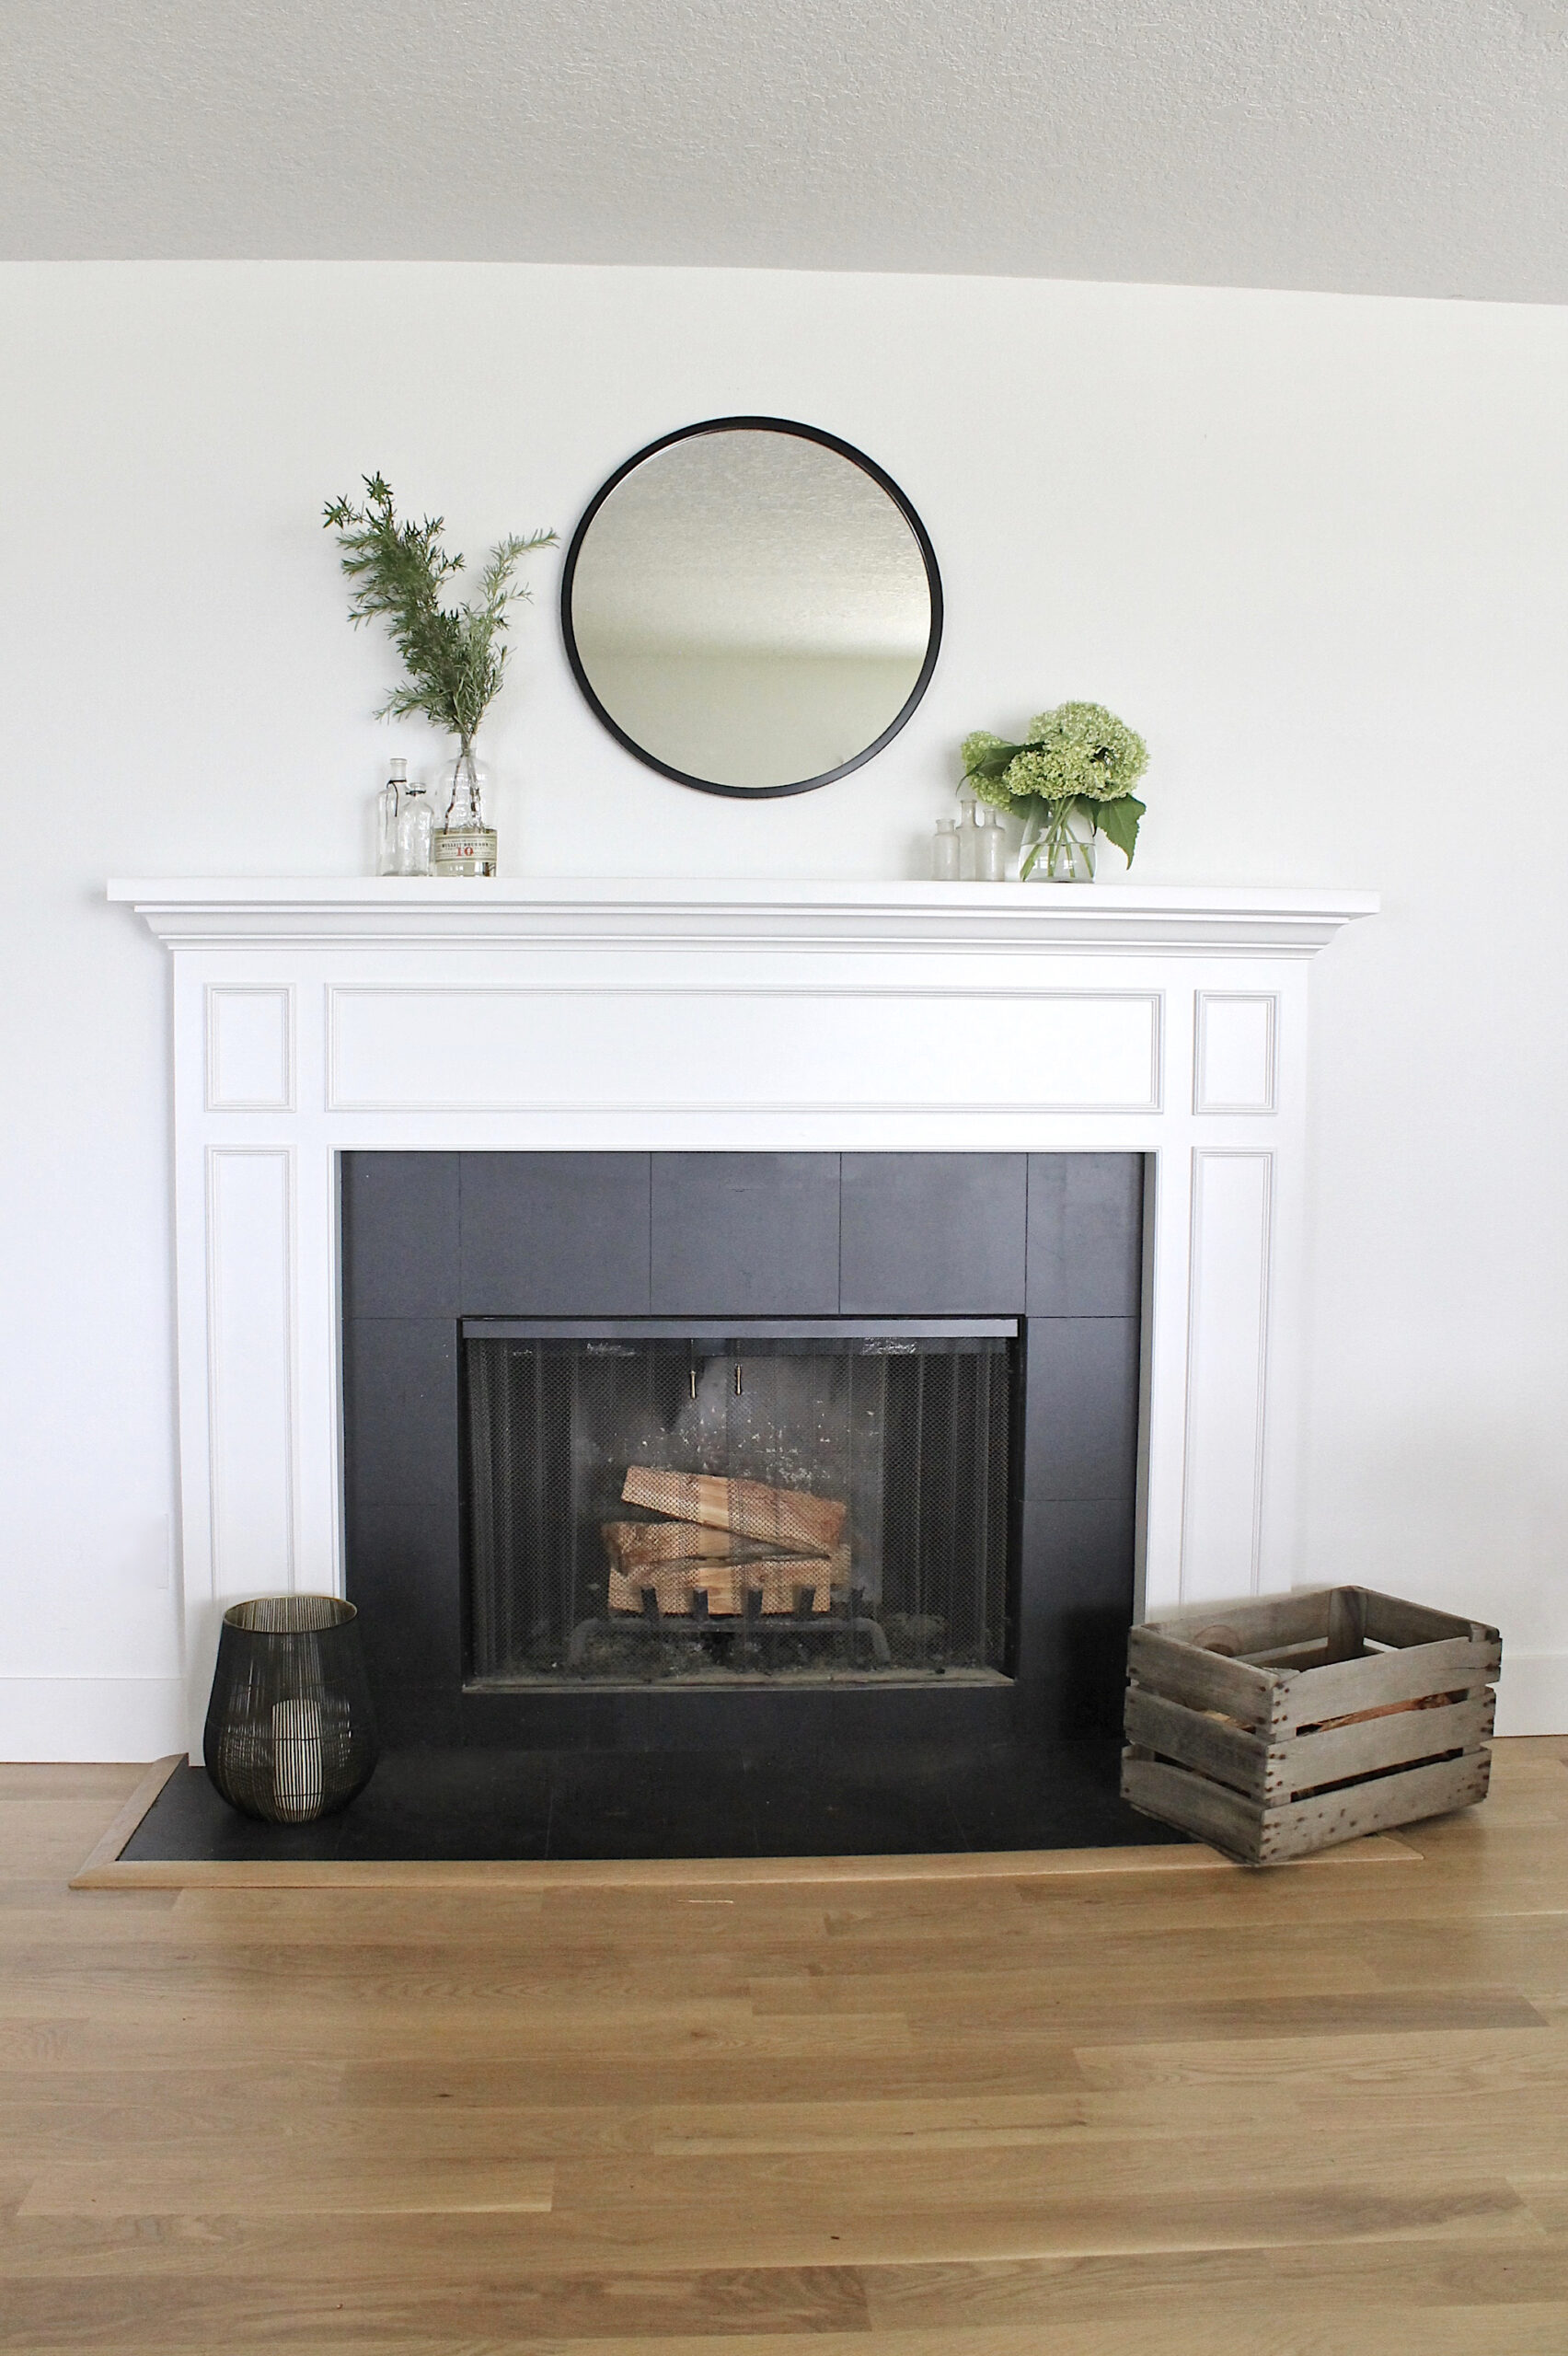 How To Paint A Ceramic Tile Fireplace, How To Remove Old Tile From Fireplace